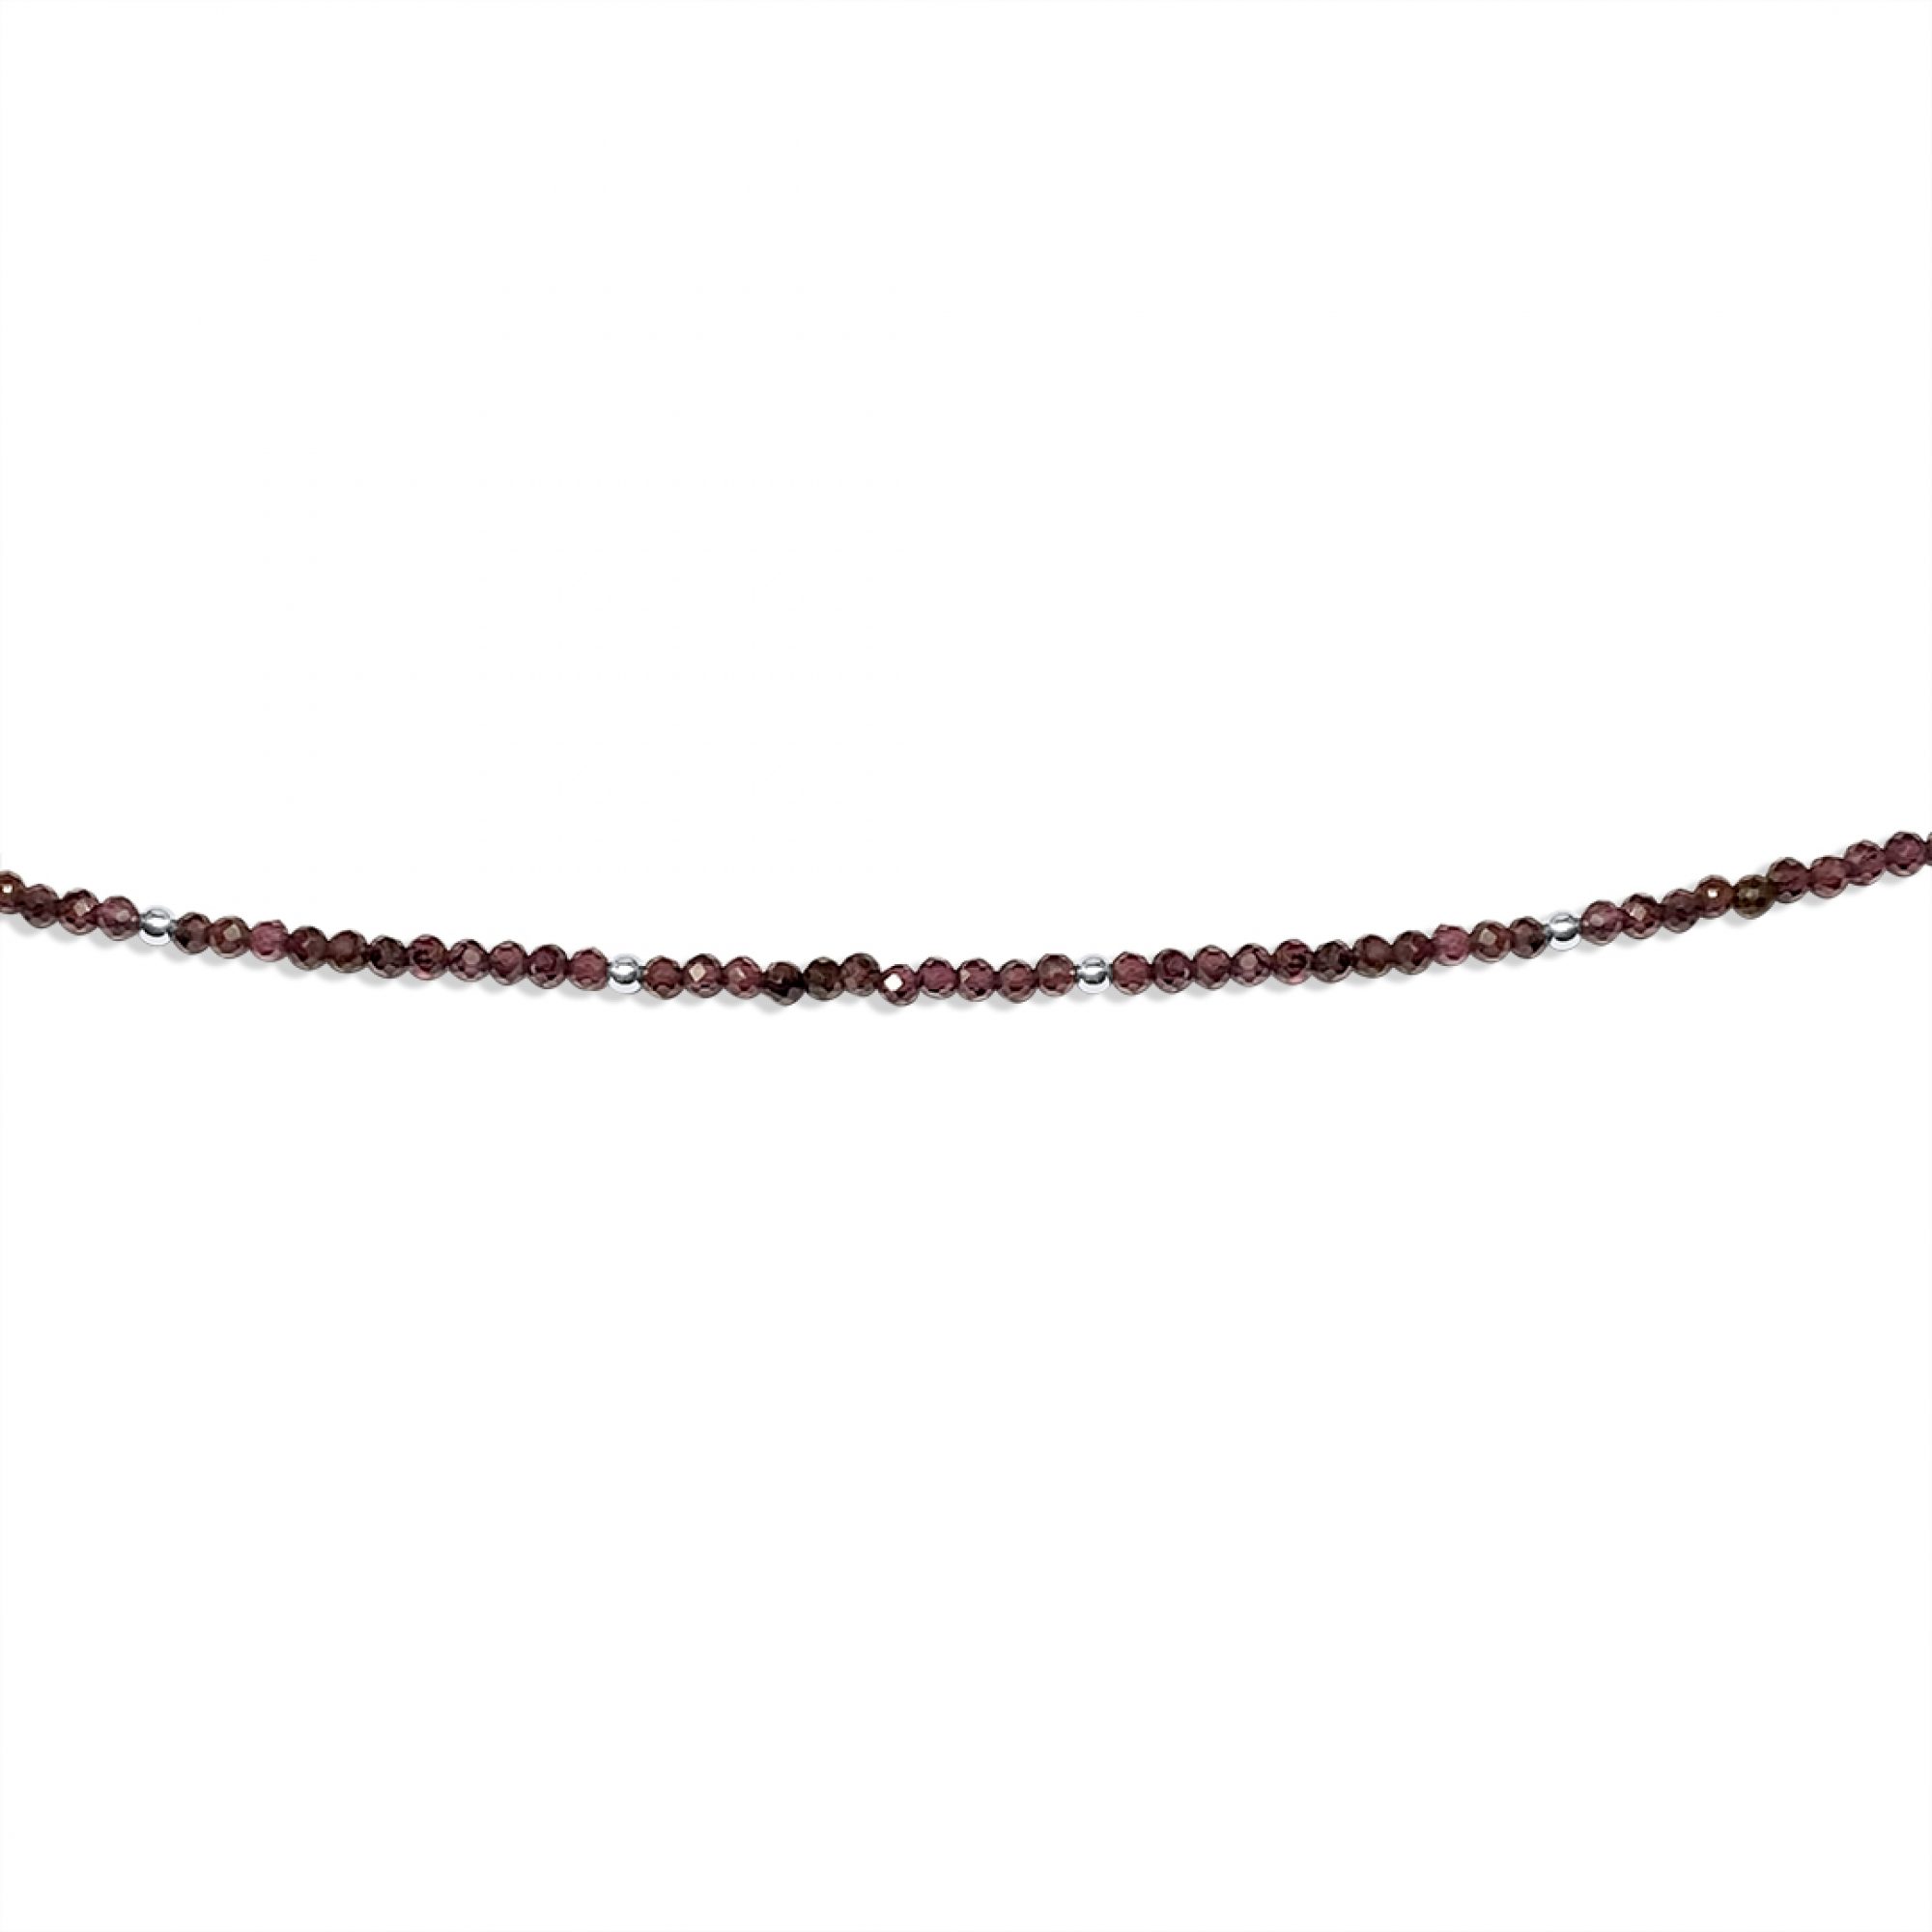 Anklet with garnet beads